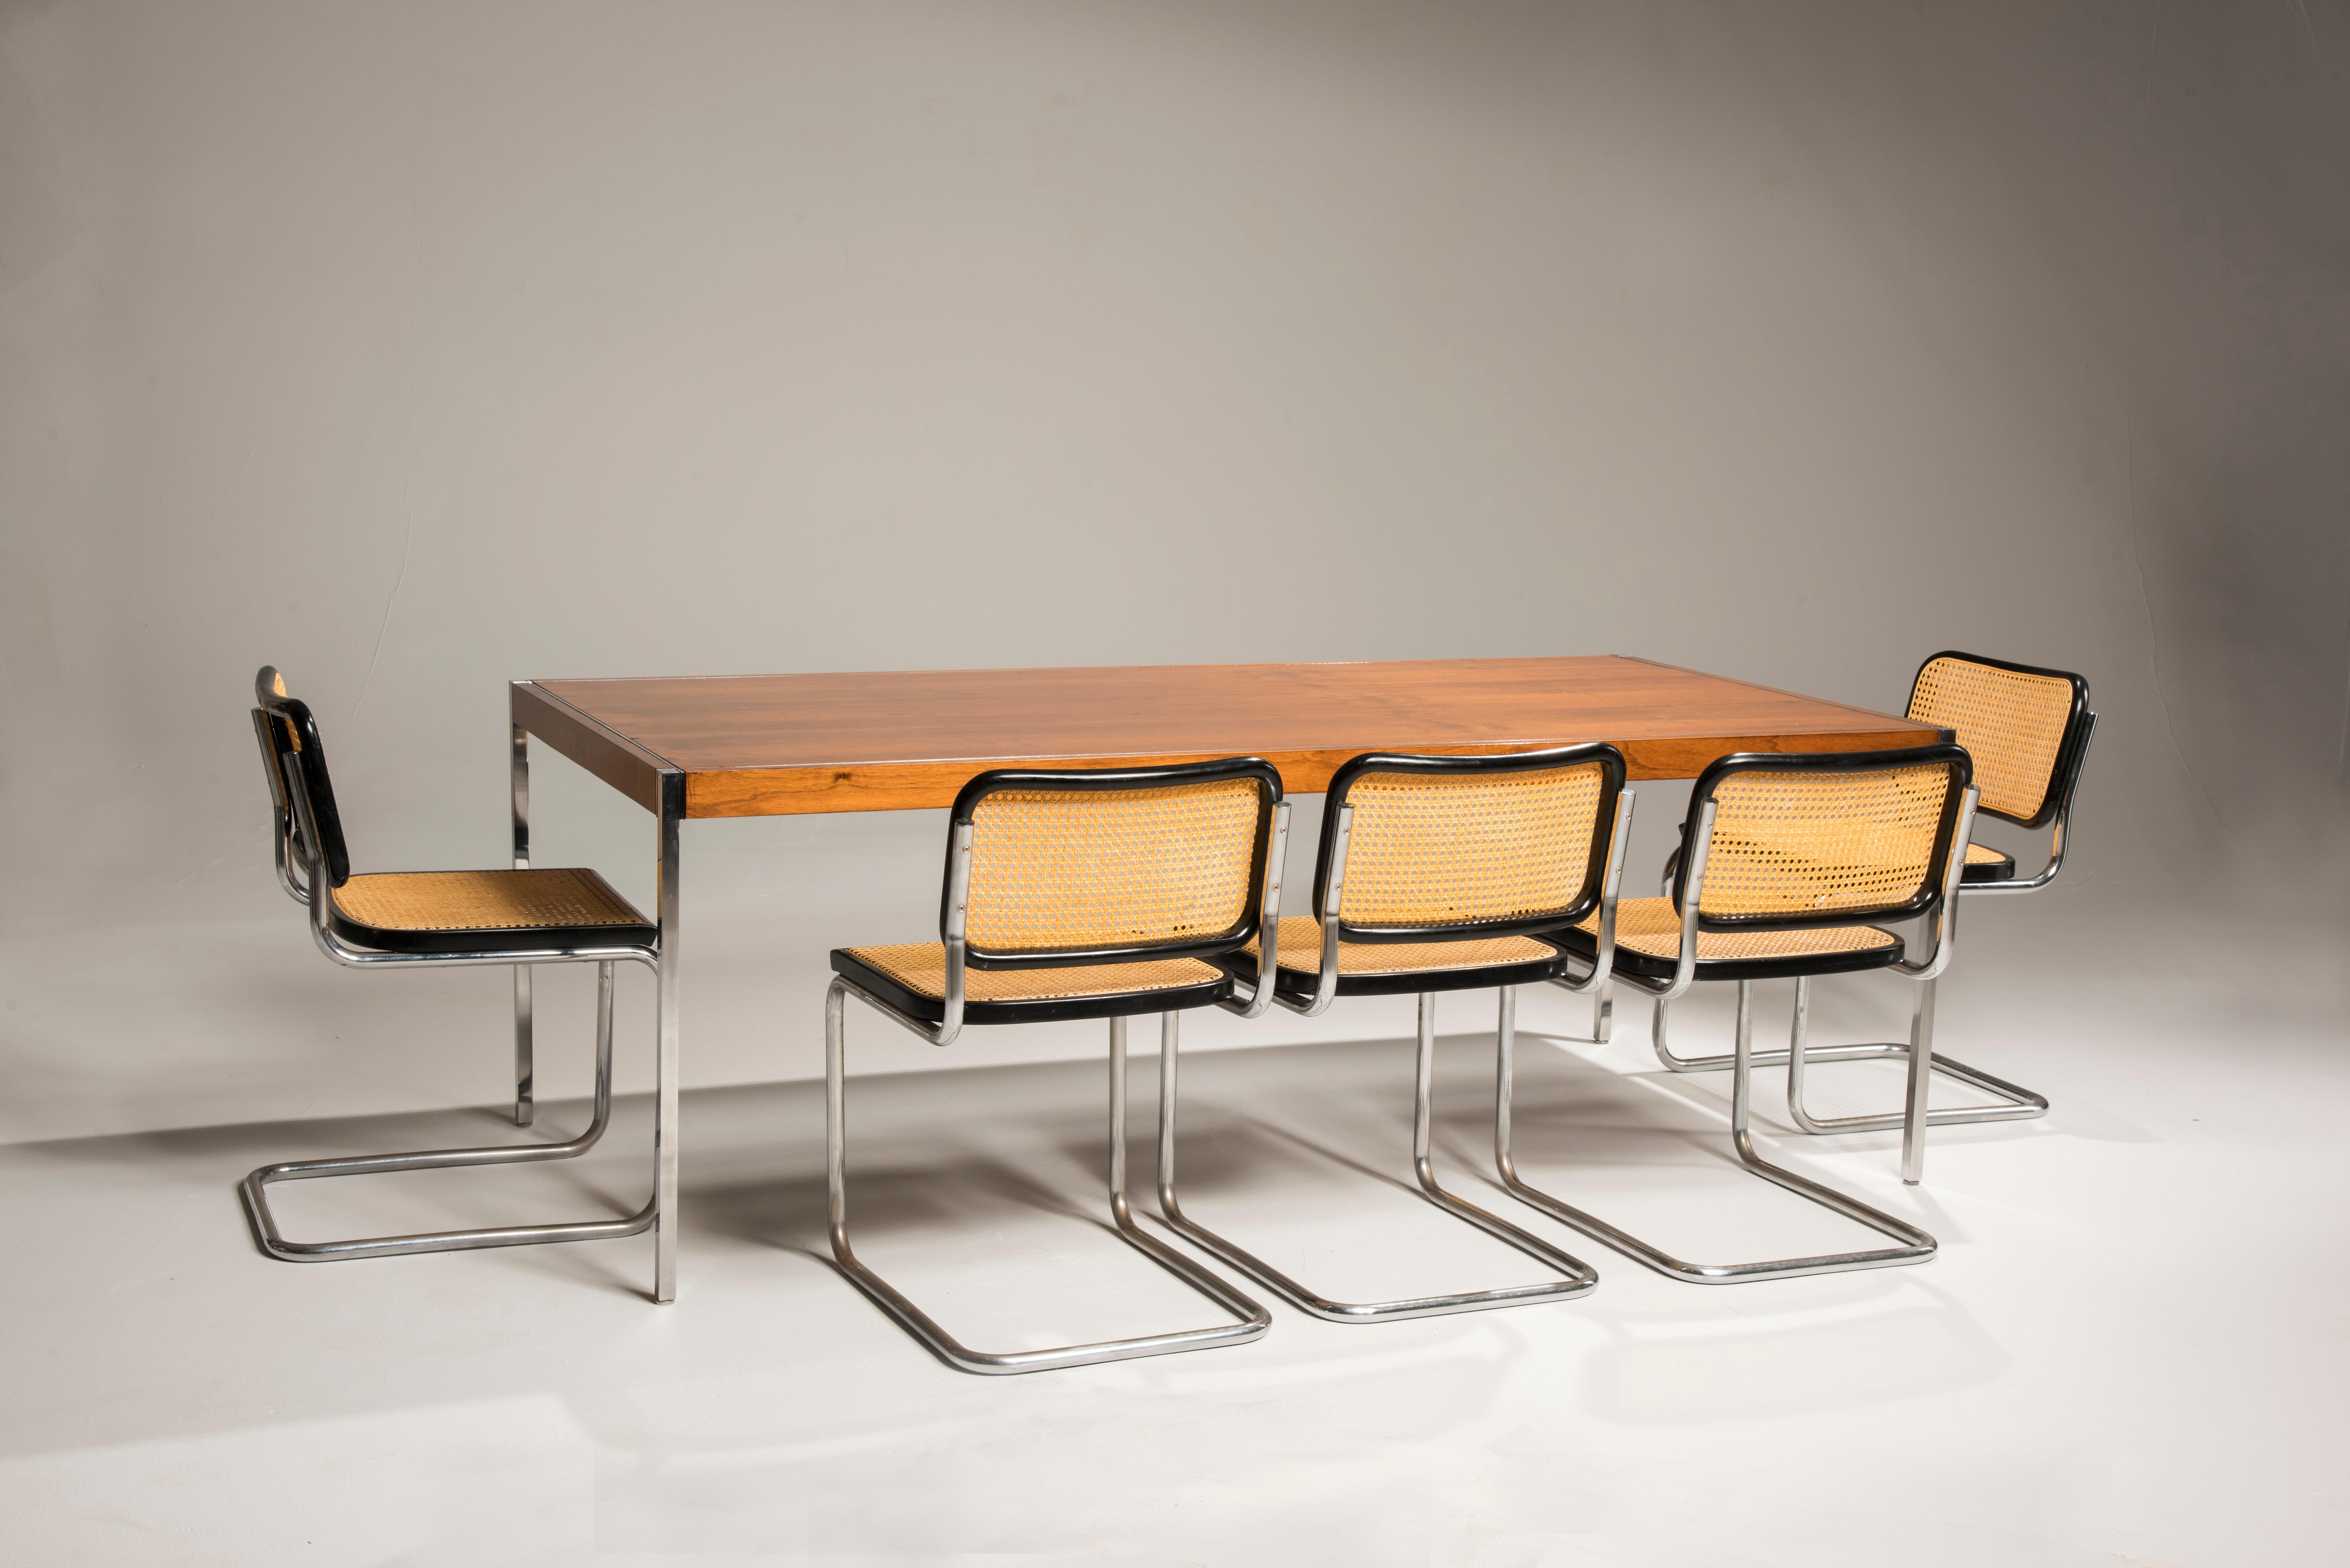 Steel Bauhaus Marcel Breuer Cesca Chairs for Knoll Production, 8 Chairs Available